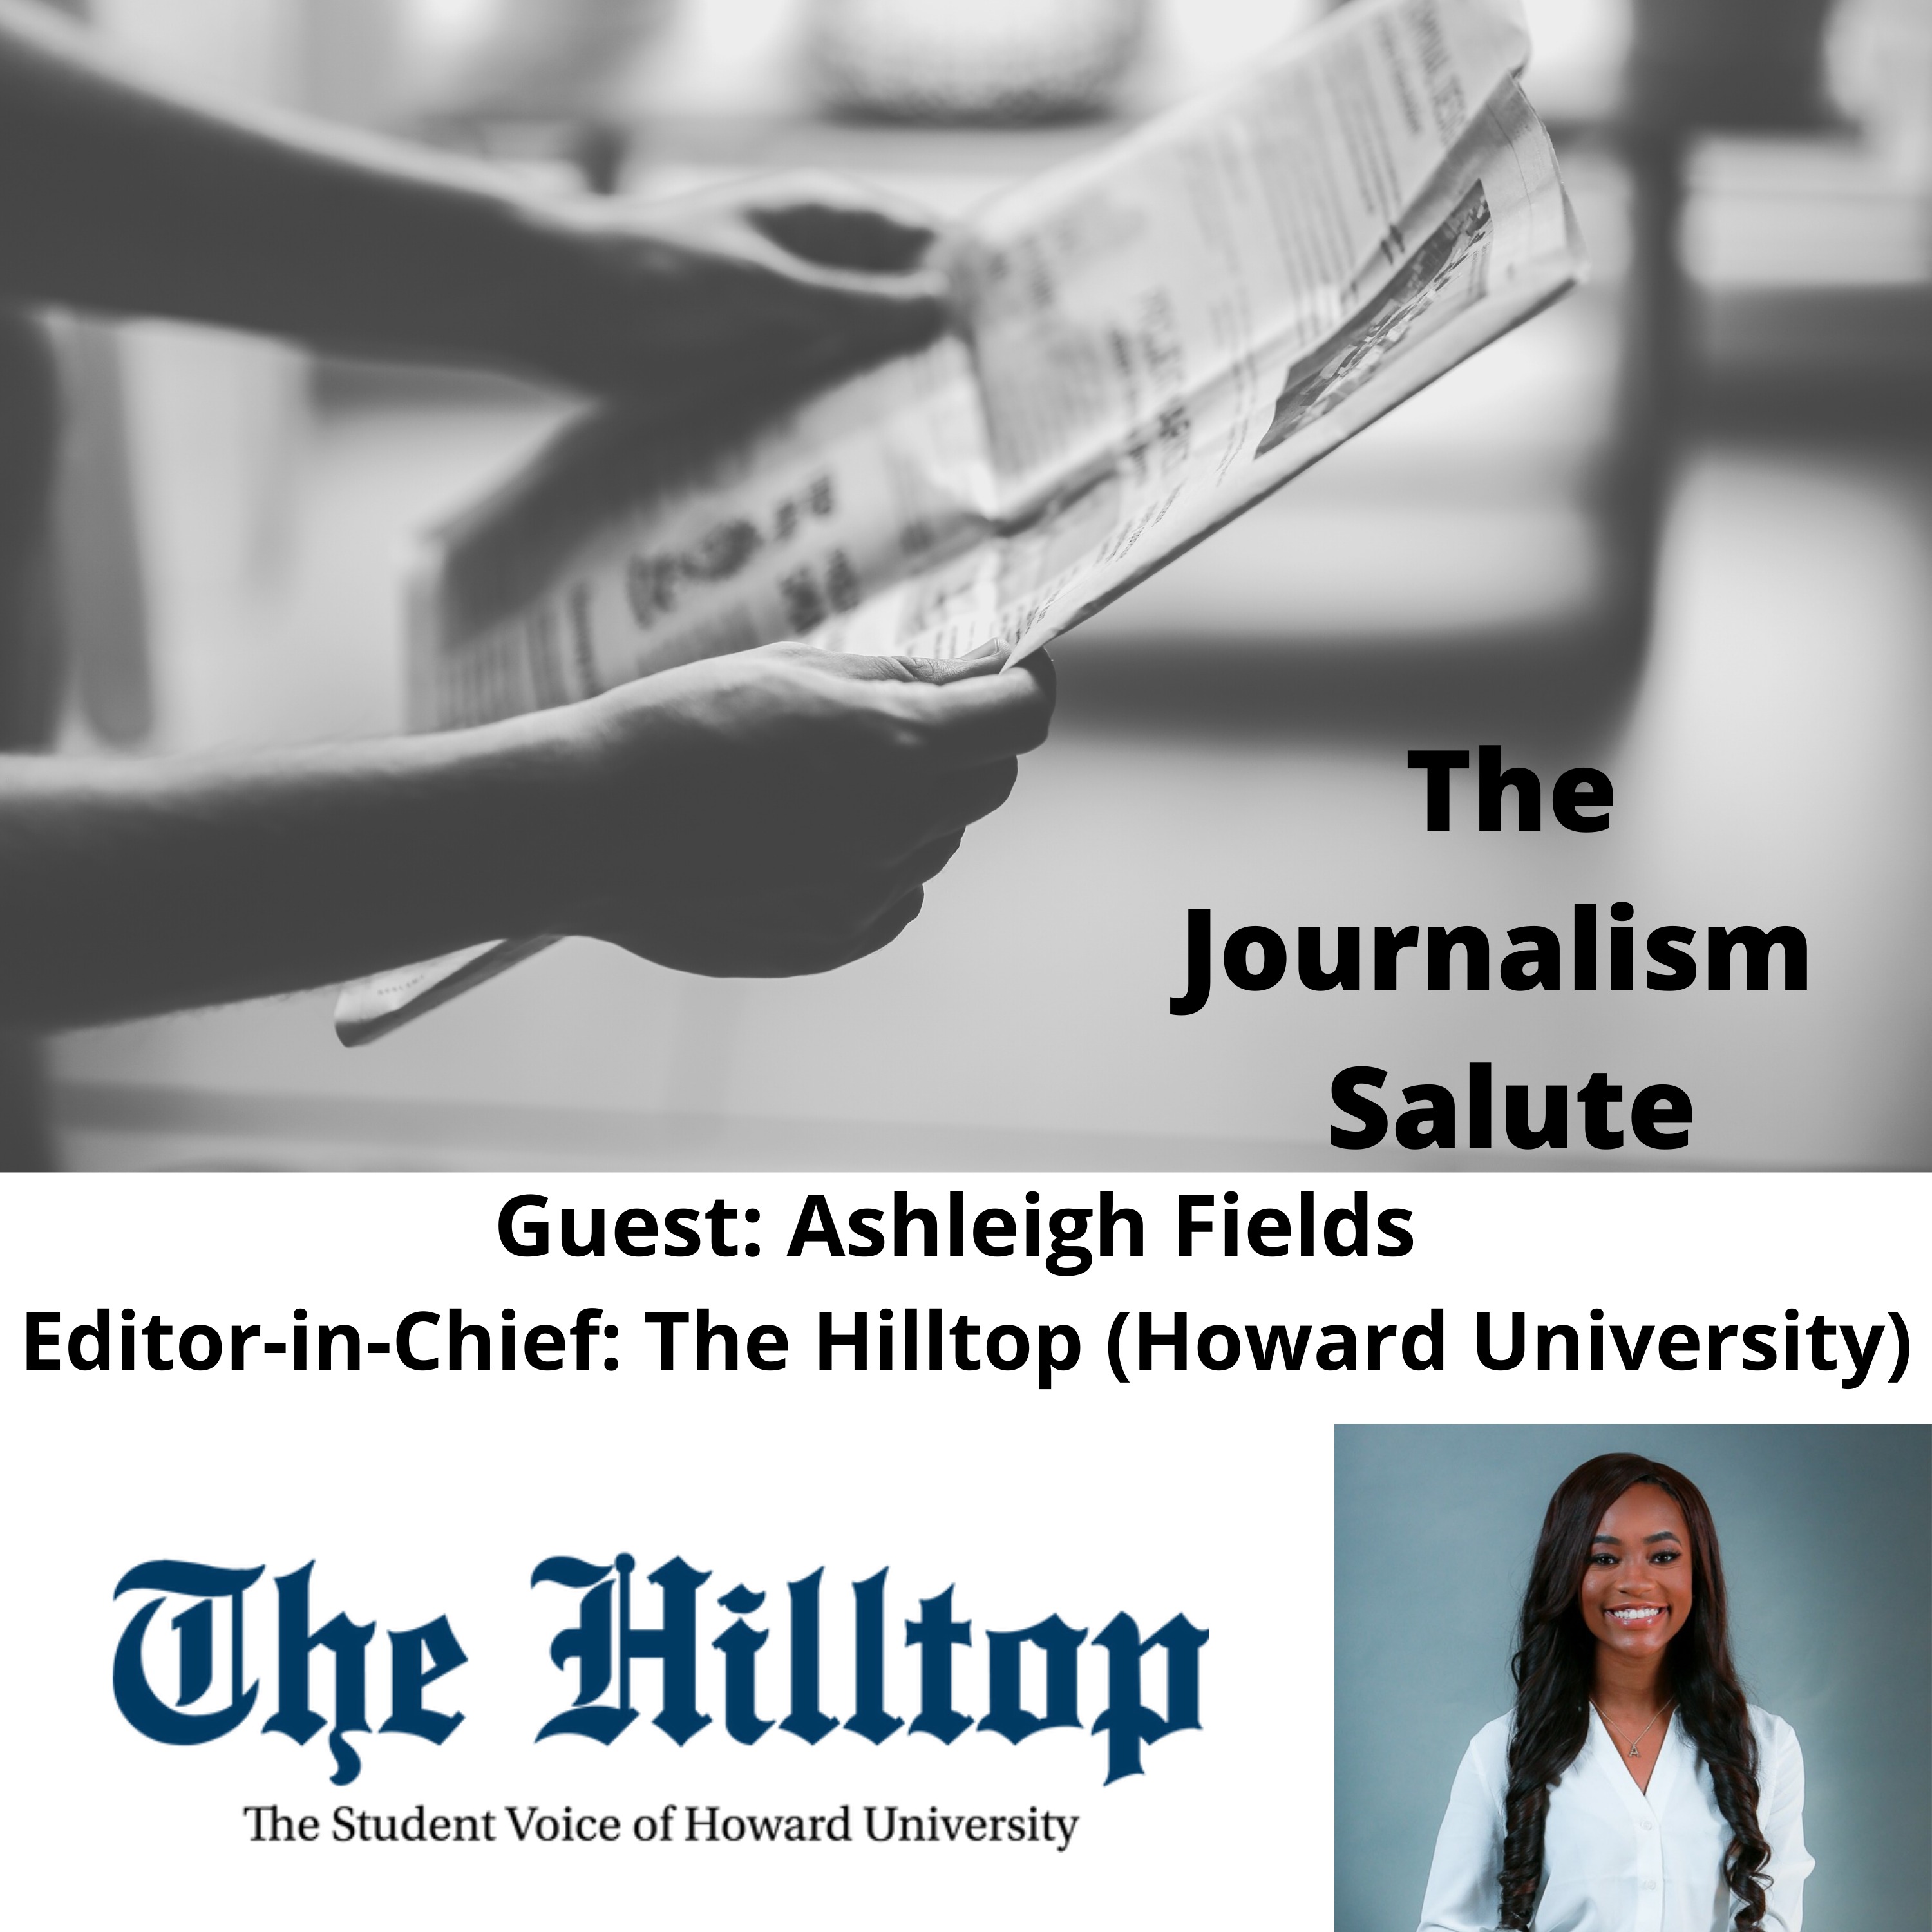 Ashleigh Fields, Editor-in-Chief of The Hilltop (Howard University)